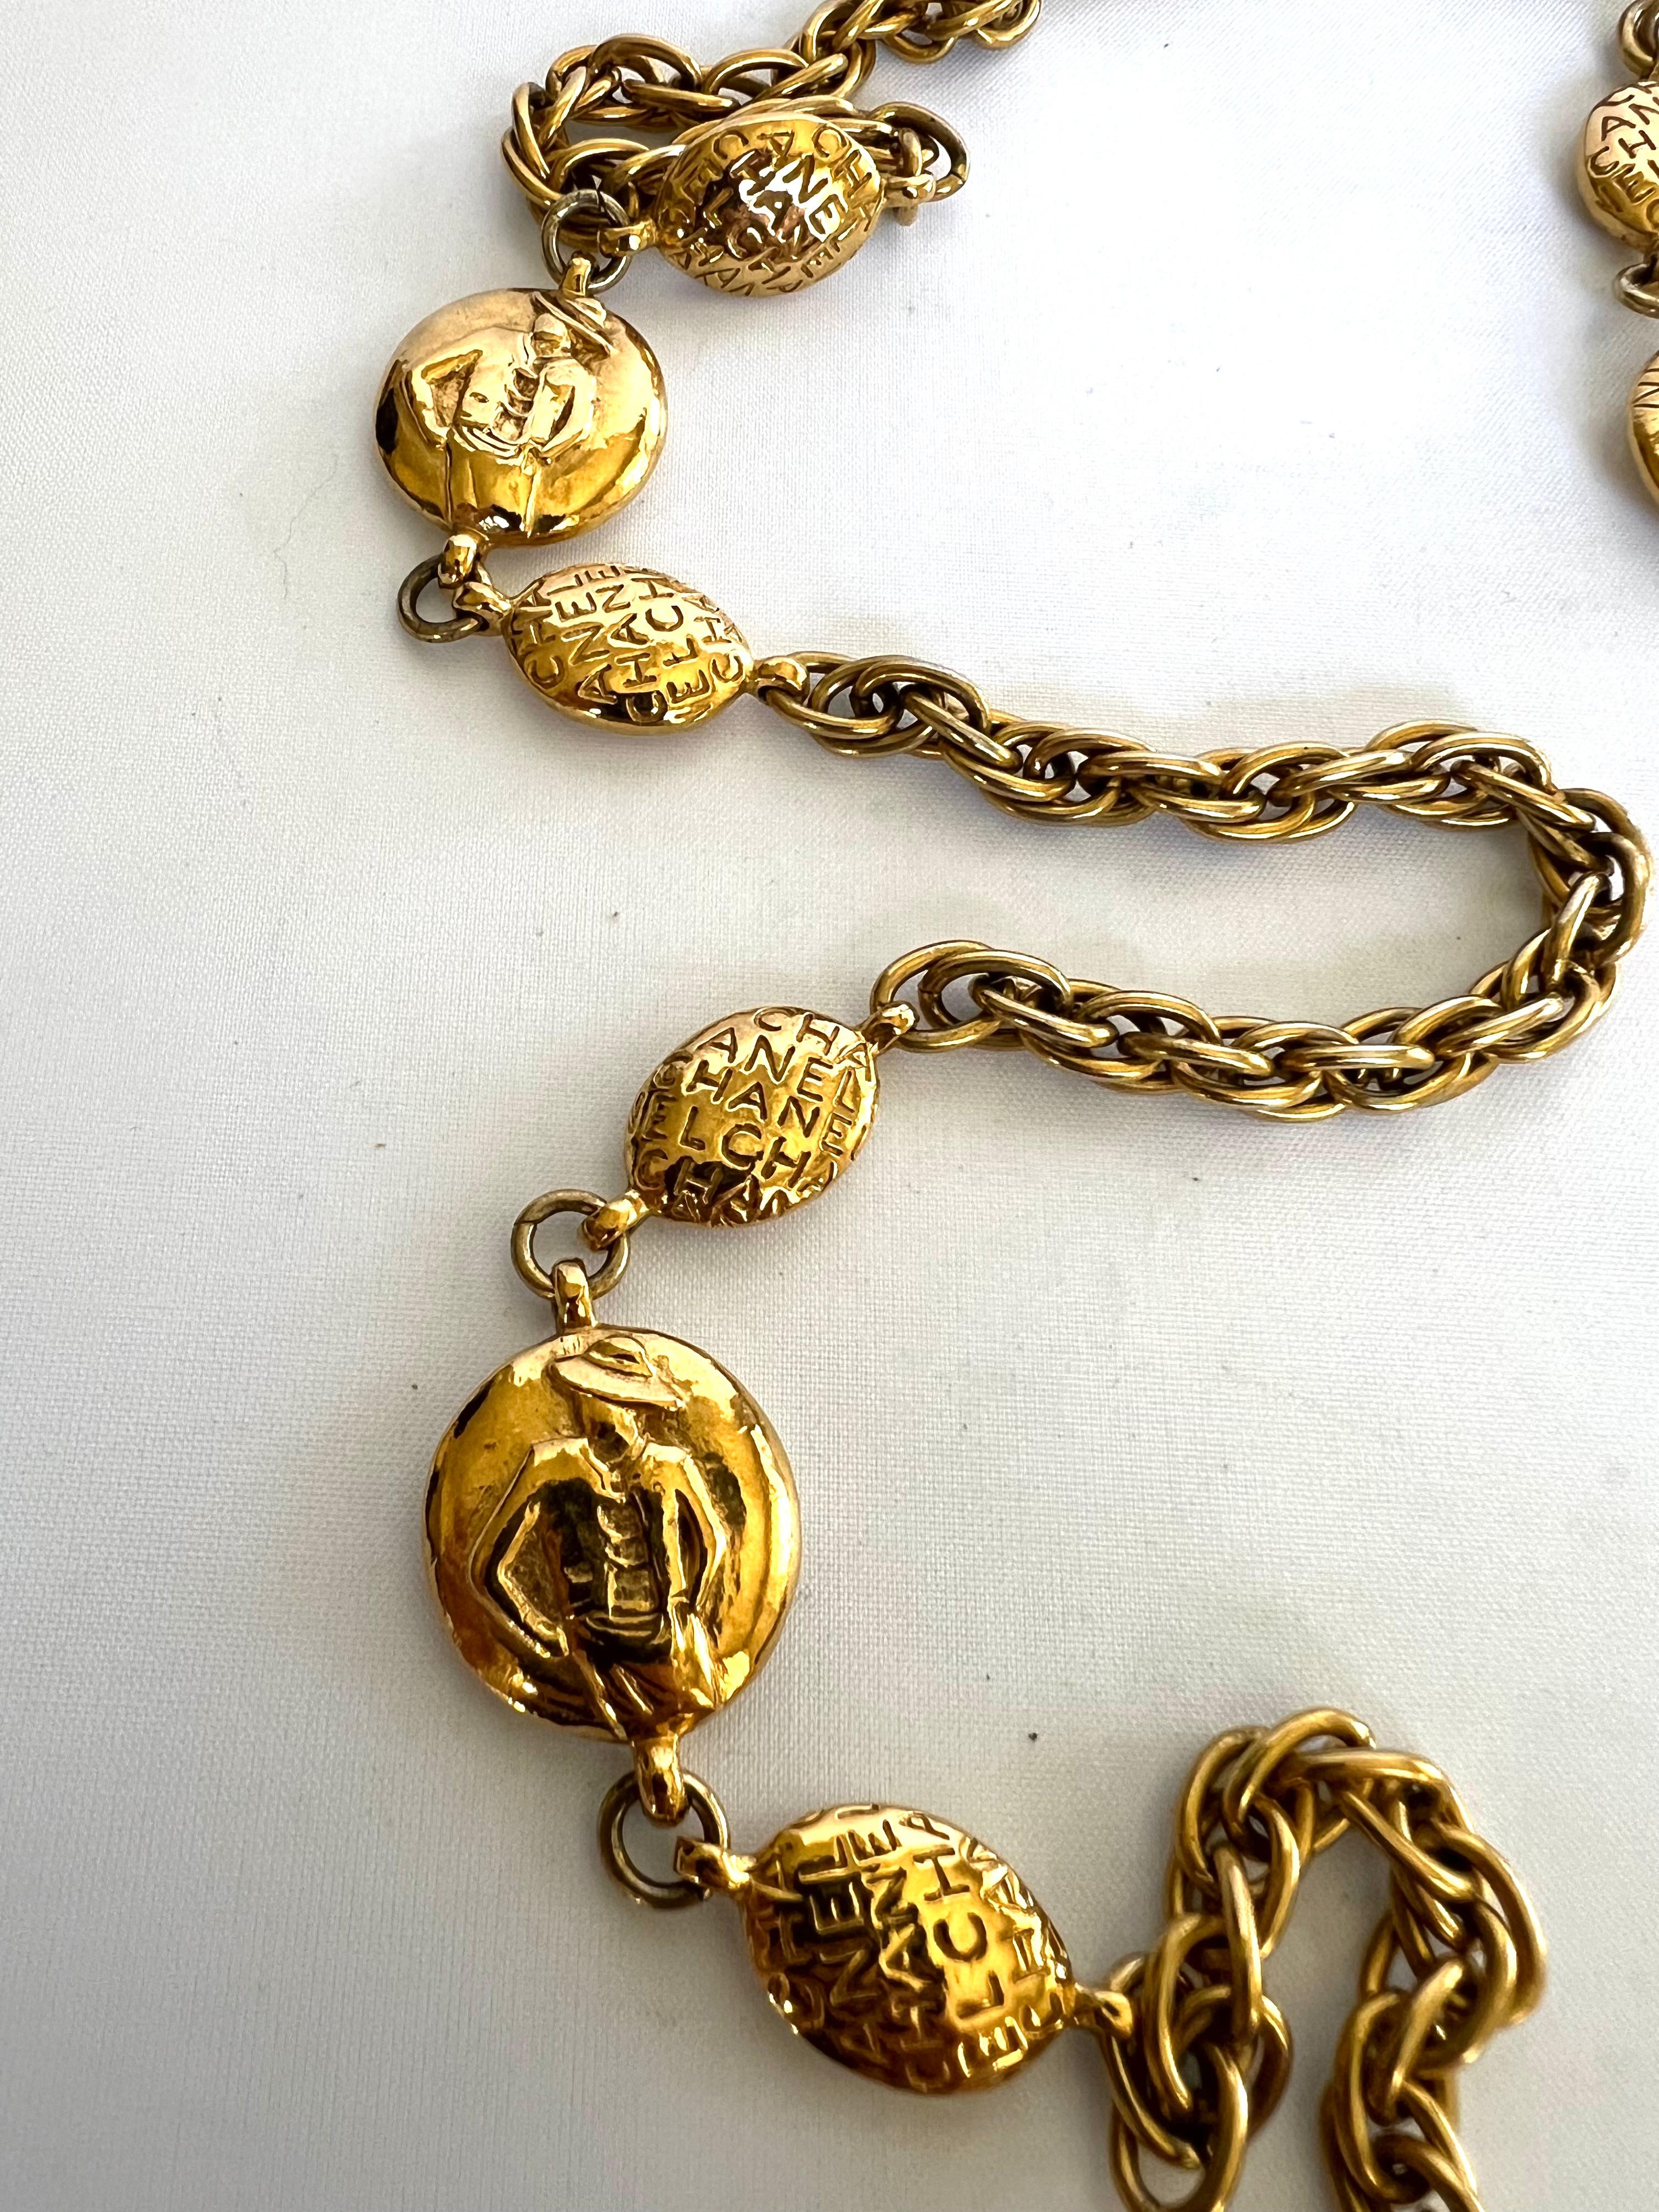 Scarce vintage Chanel mademoiselle station necklace - signed, made in France circa 1970/80. 